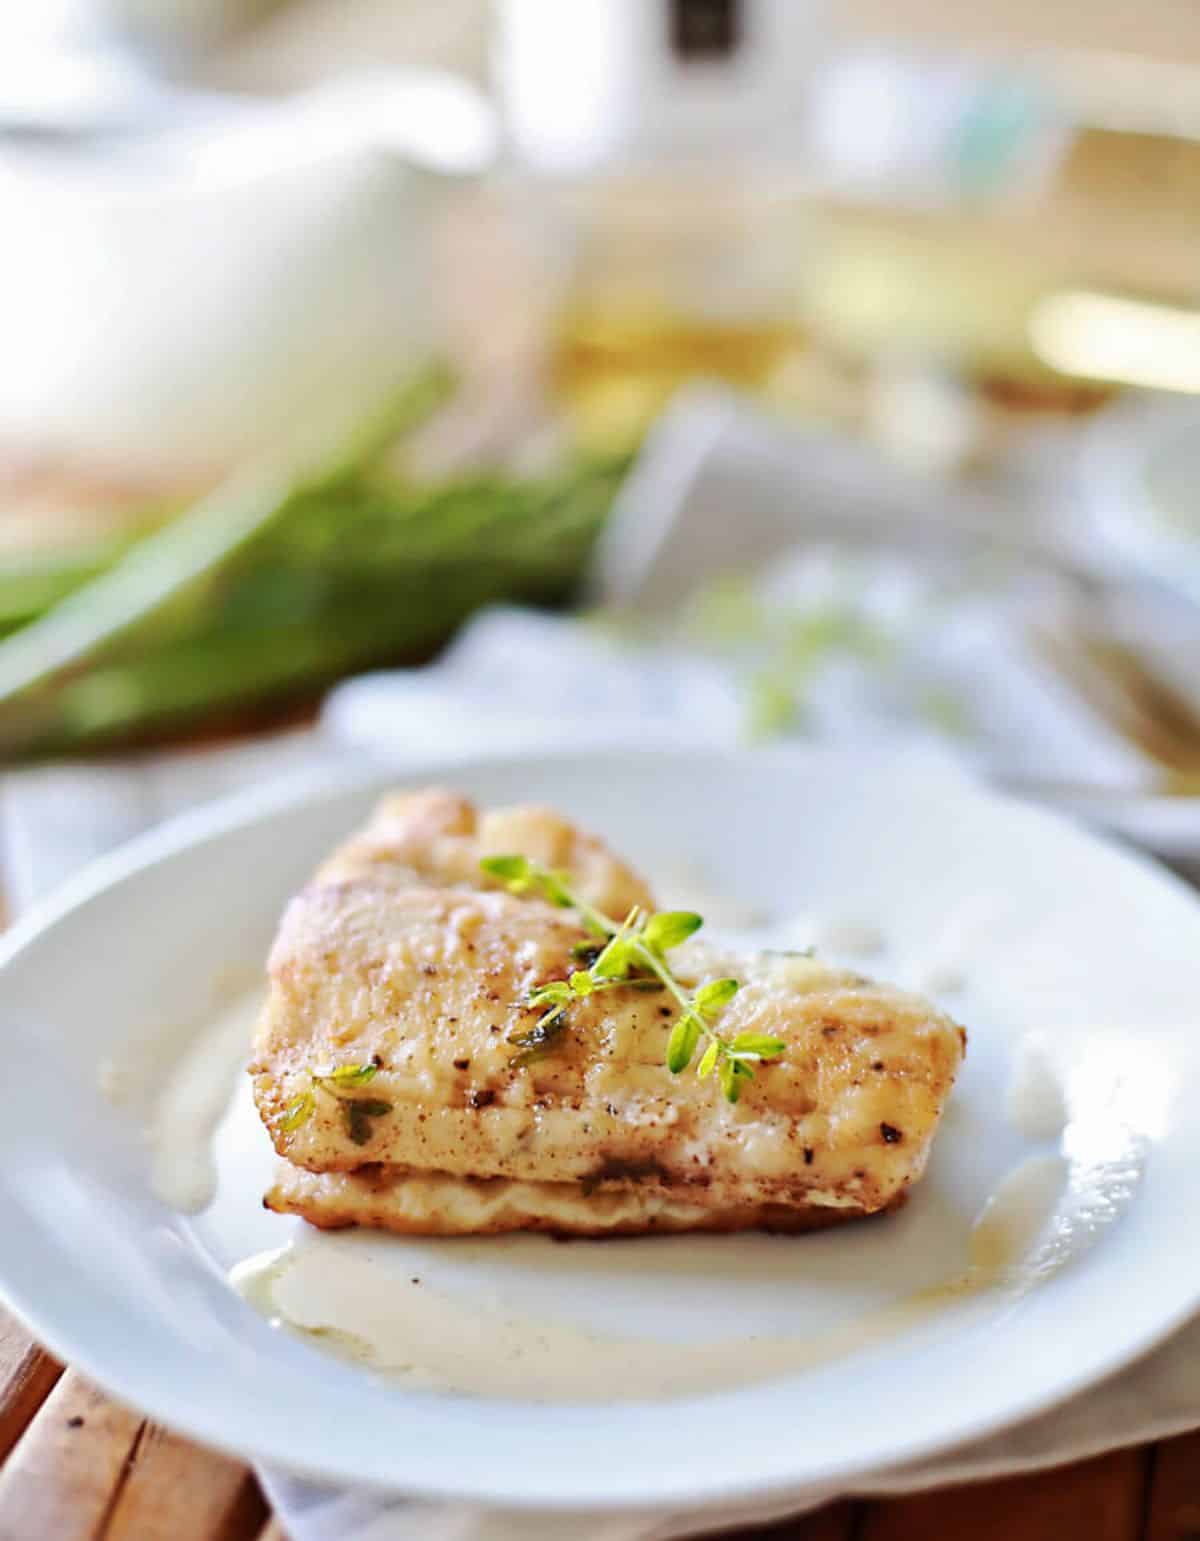 A piece of haddock in butter wine sauce on a white plate.